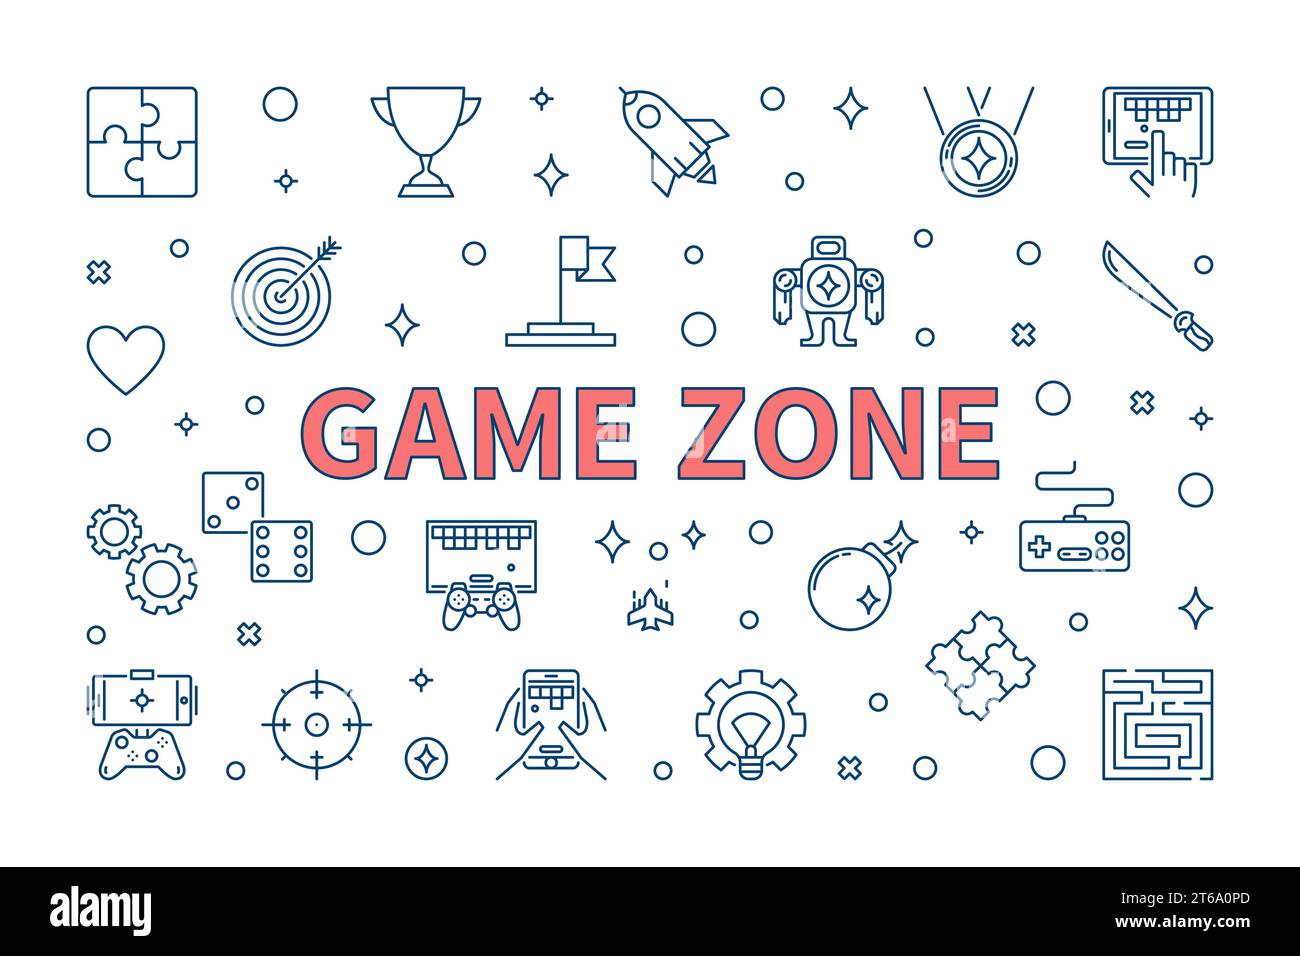 Game Zone vector concept horizontal illustration in thin line style Stock Vector